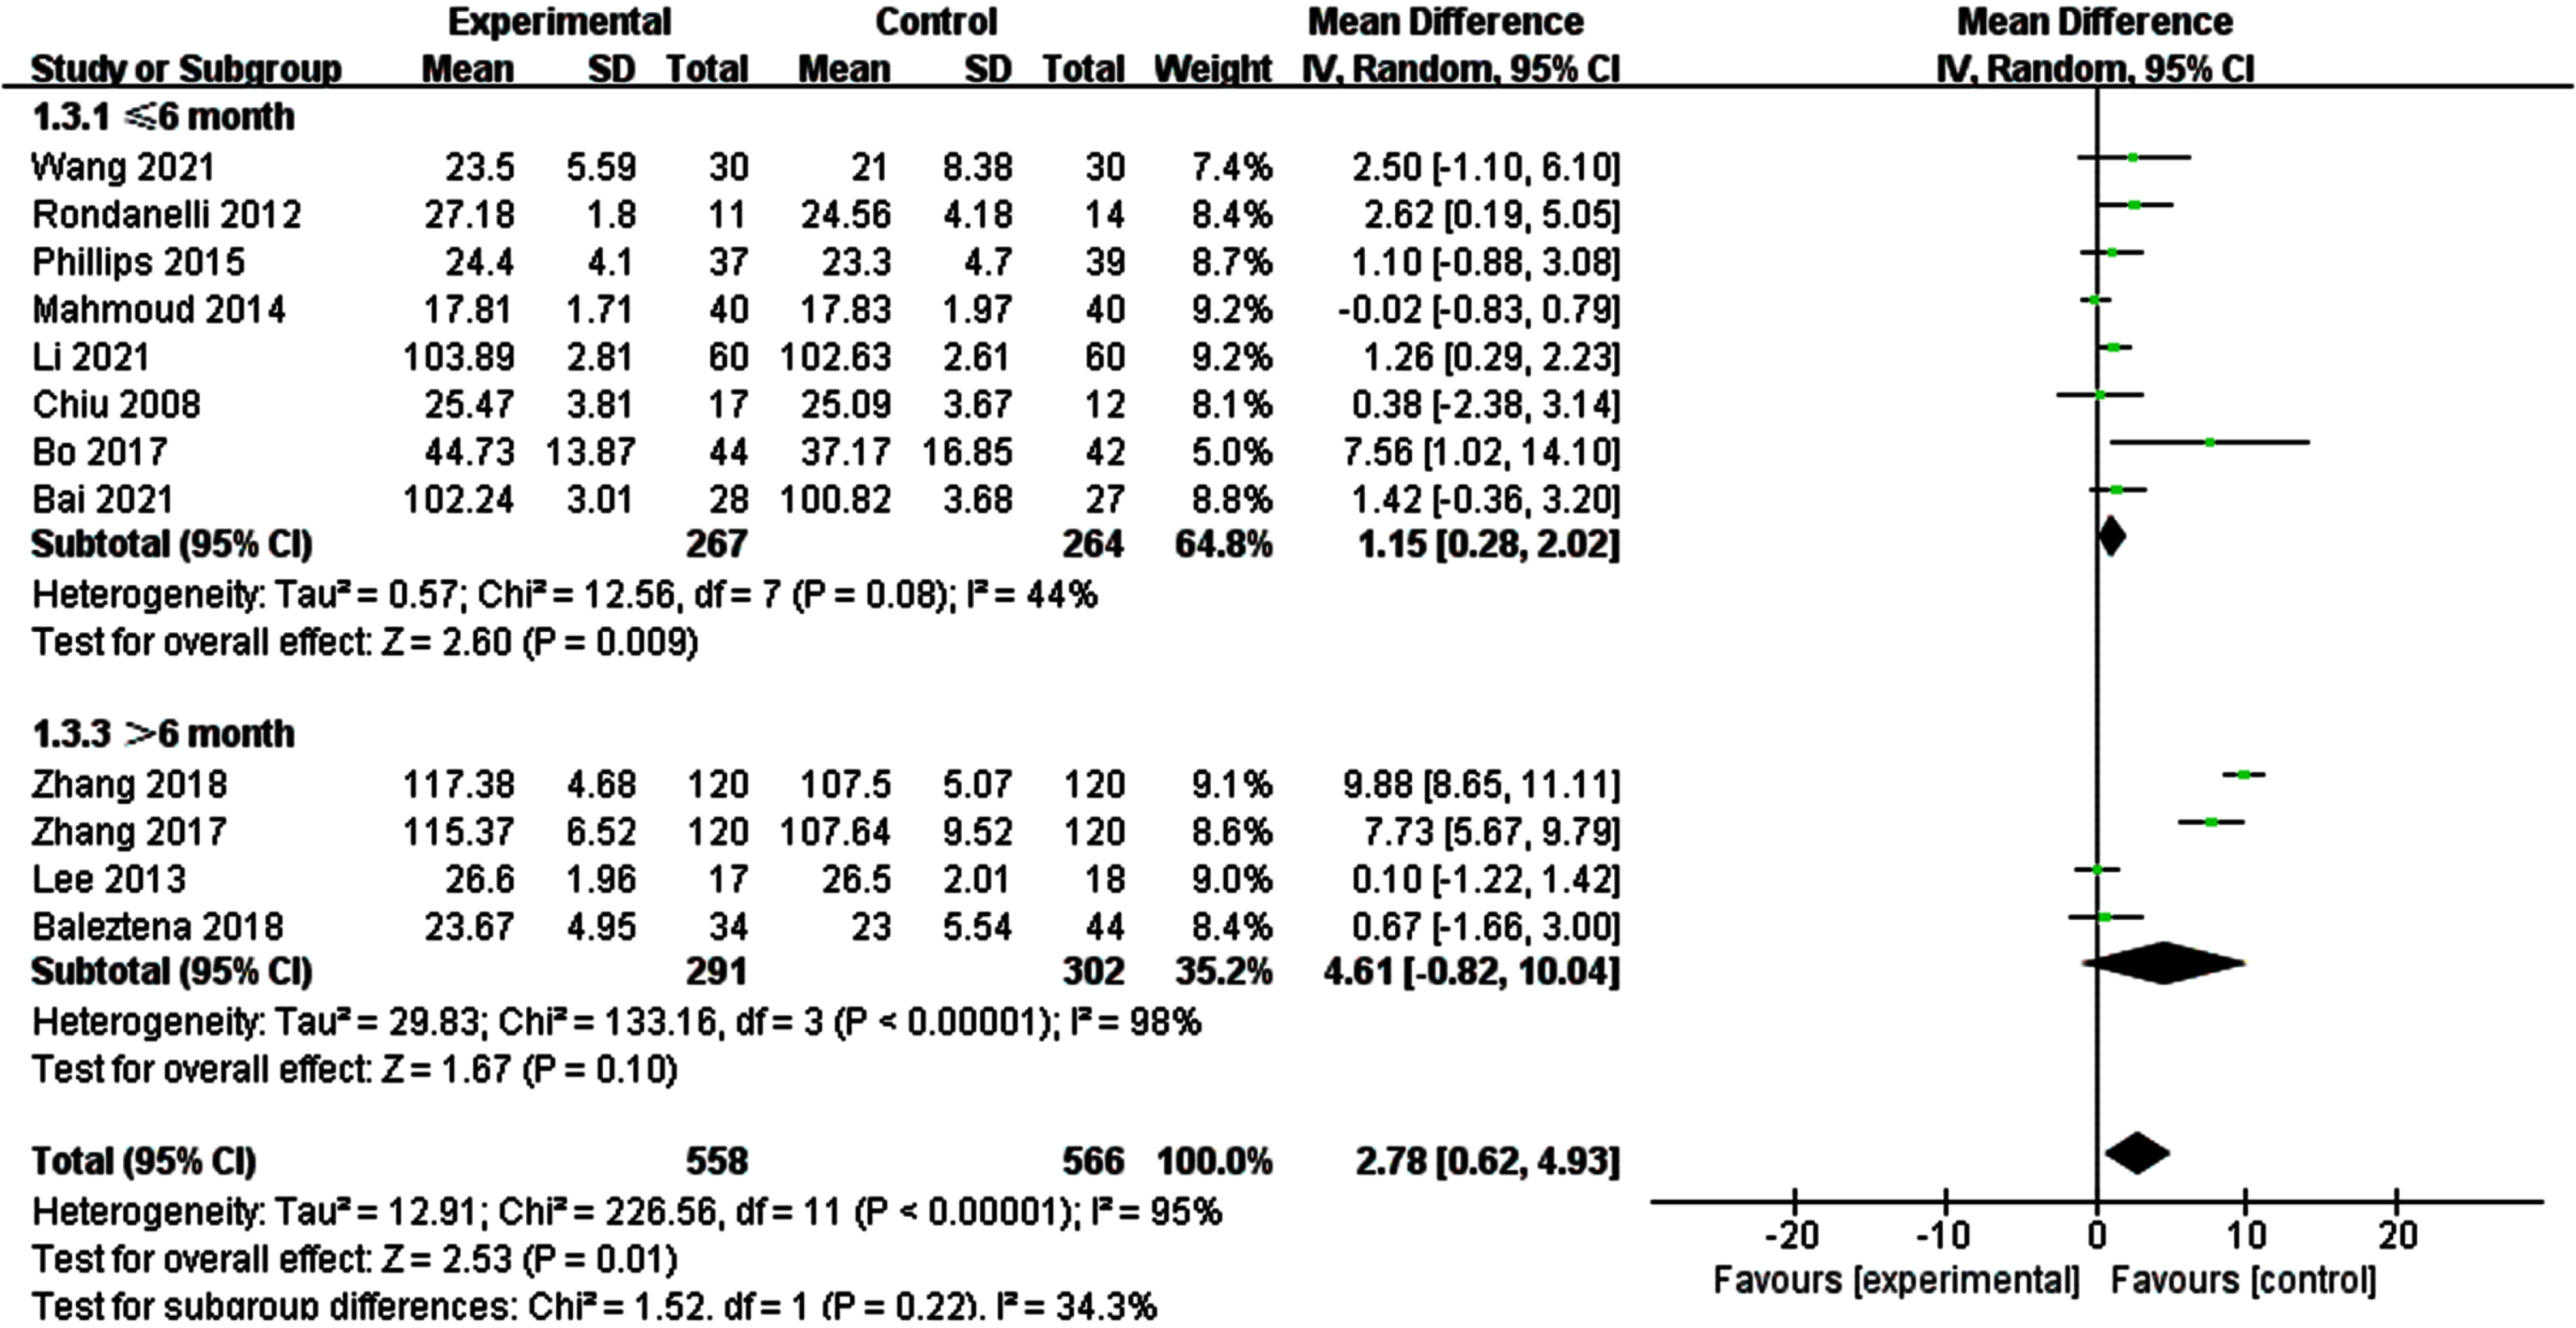 Subgroup analysis of overall cognitive function according to intervention duration. For ≤6 month, the test for heterogeneity I2 = 44%, p = 0.08.The overall effect p = 0.009 <0.05, the results shows supplementing n-3PUFAs ≤6 months has positive significance for the overall cognitive function of the elderly with MCI. For >6 month, the test for heterogeneity I2 = 98%, p <  0.0001. The overall effect p = 0.10 <0.05, It shows that the intervention measures have no positive impact on global cognitive function of the elderly with MCI.